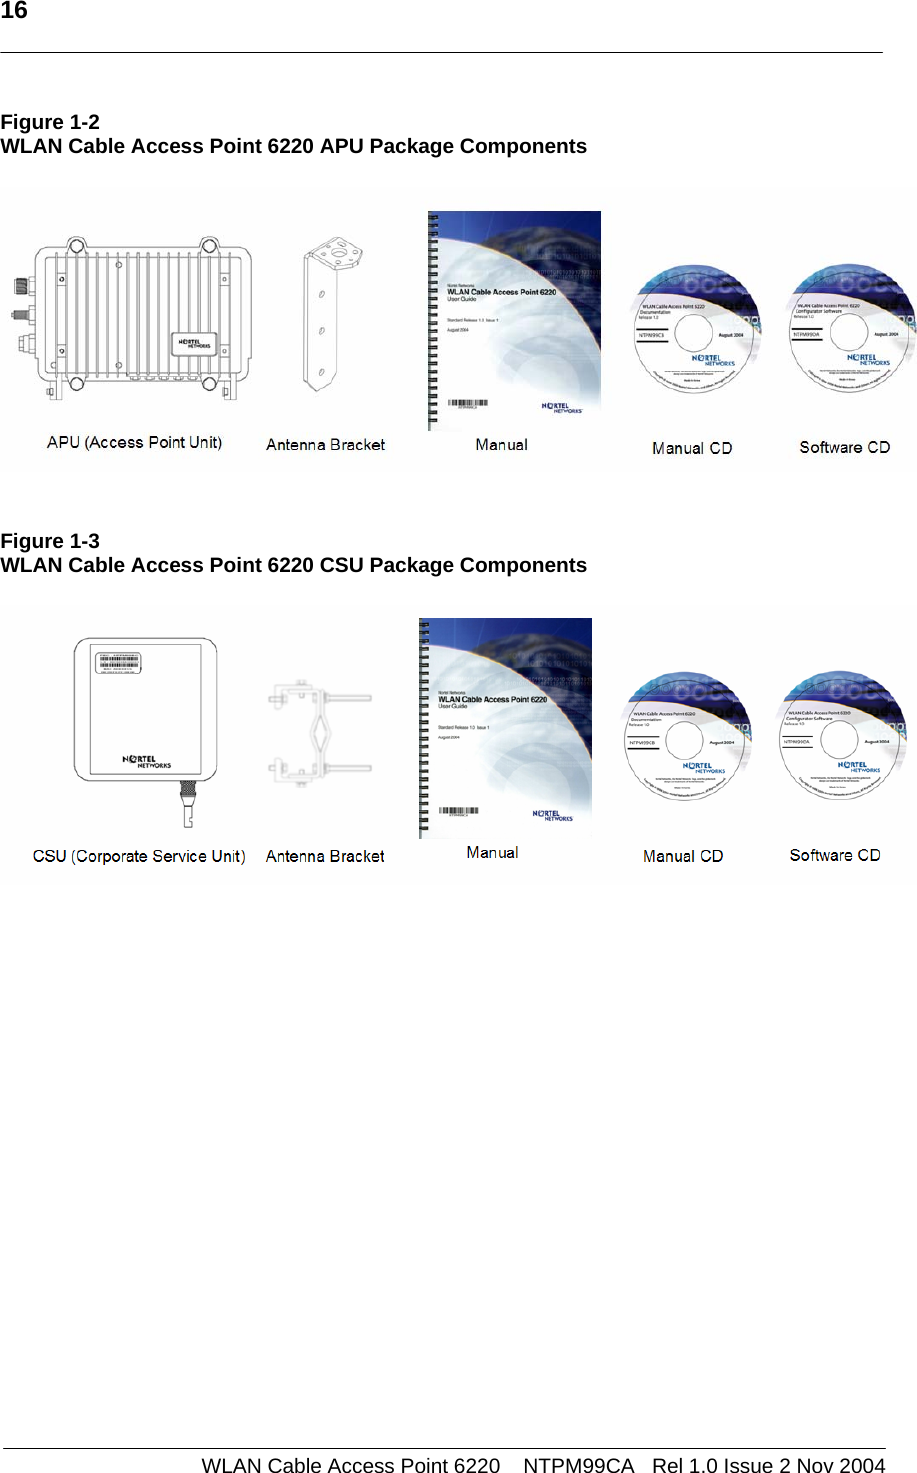   16     WLAN Cable Access Point 6220    NTPM99CA   Rel 1.0 Issue 2 Nov 2004 Figure 1-2 WLAN Cable Access Point 6220 APU Package Components     Figure 1-3 WLAN Cable Access Point 6220 CSU Package Components    